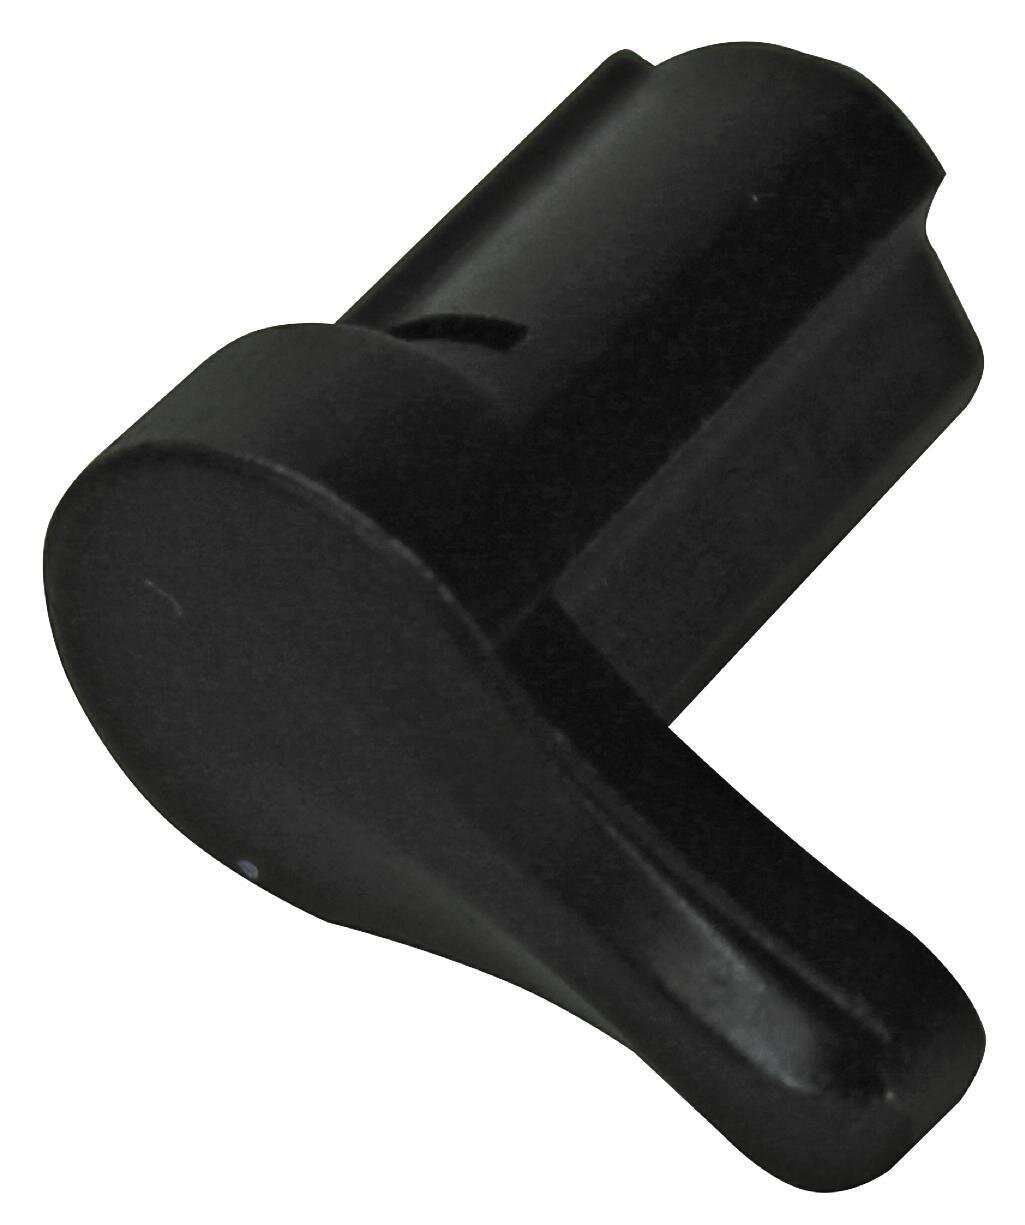 SR72KP7RK - 1/2" Drive Replacement F.T trigger